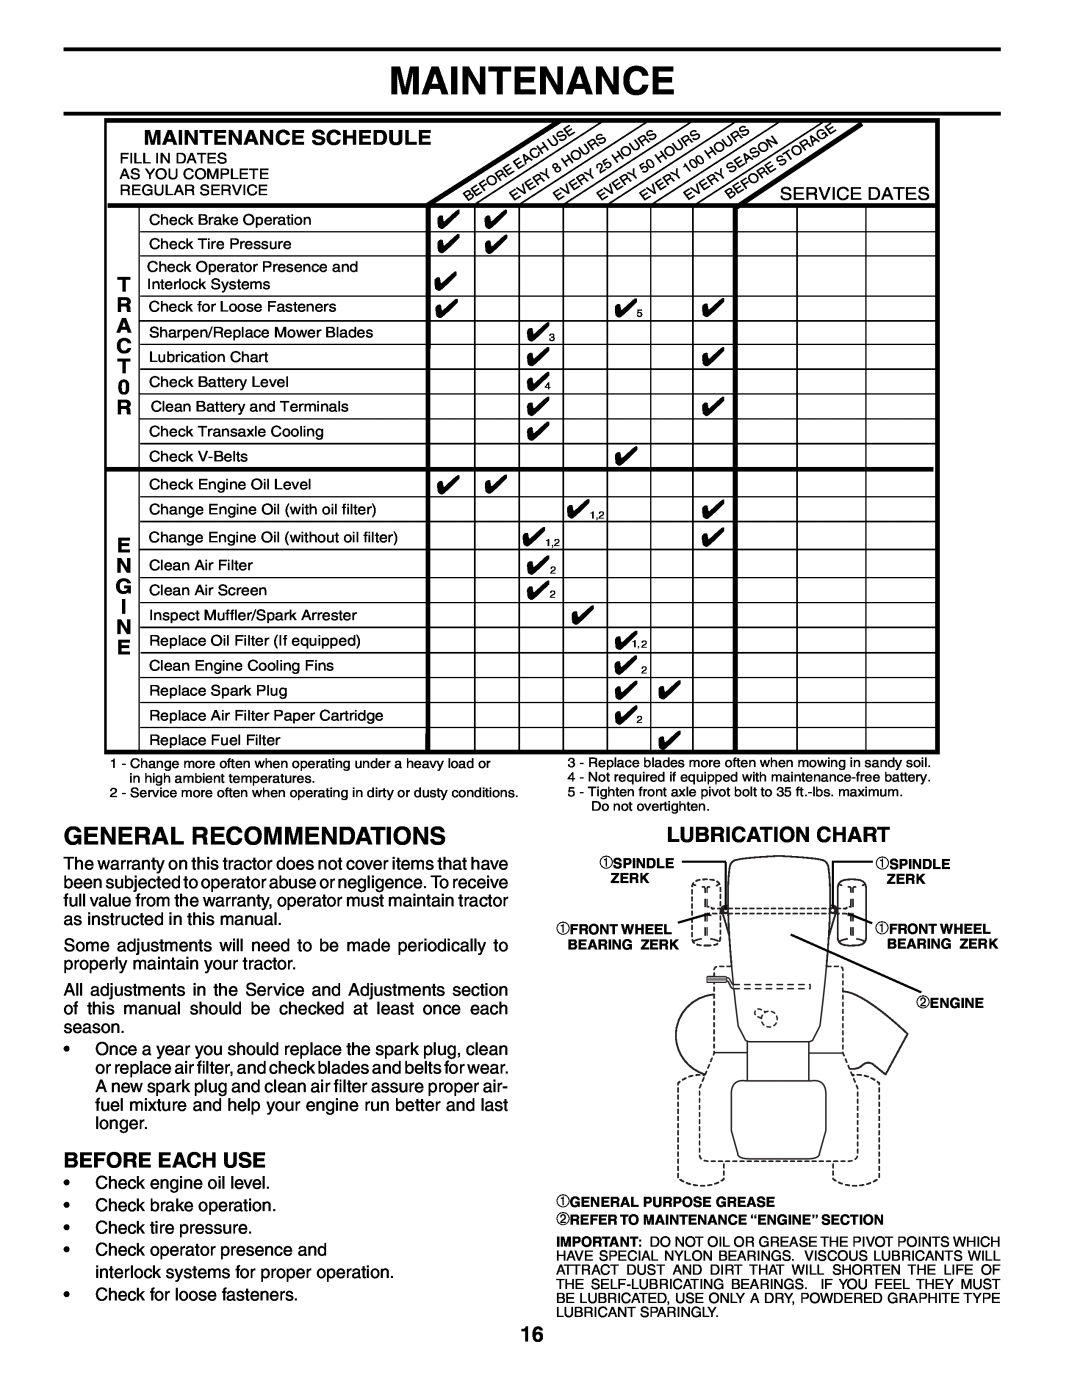 Poulan 184617 owner manual Maintenance, General Recommendations, Lubrication Chart, Before Each Use 